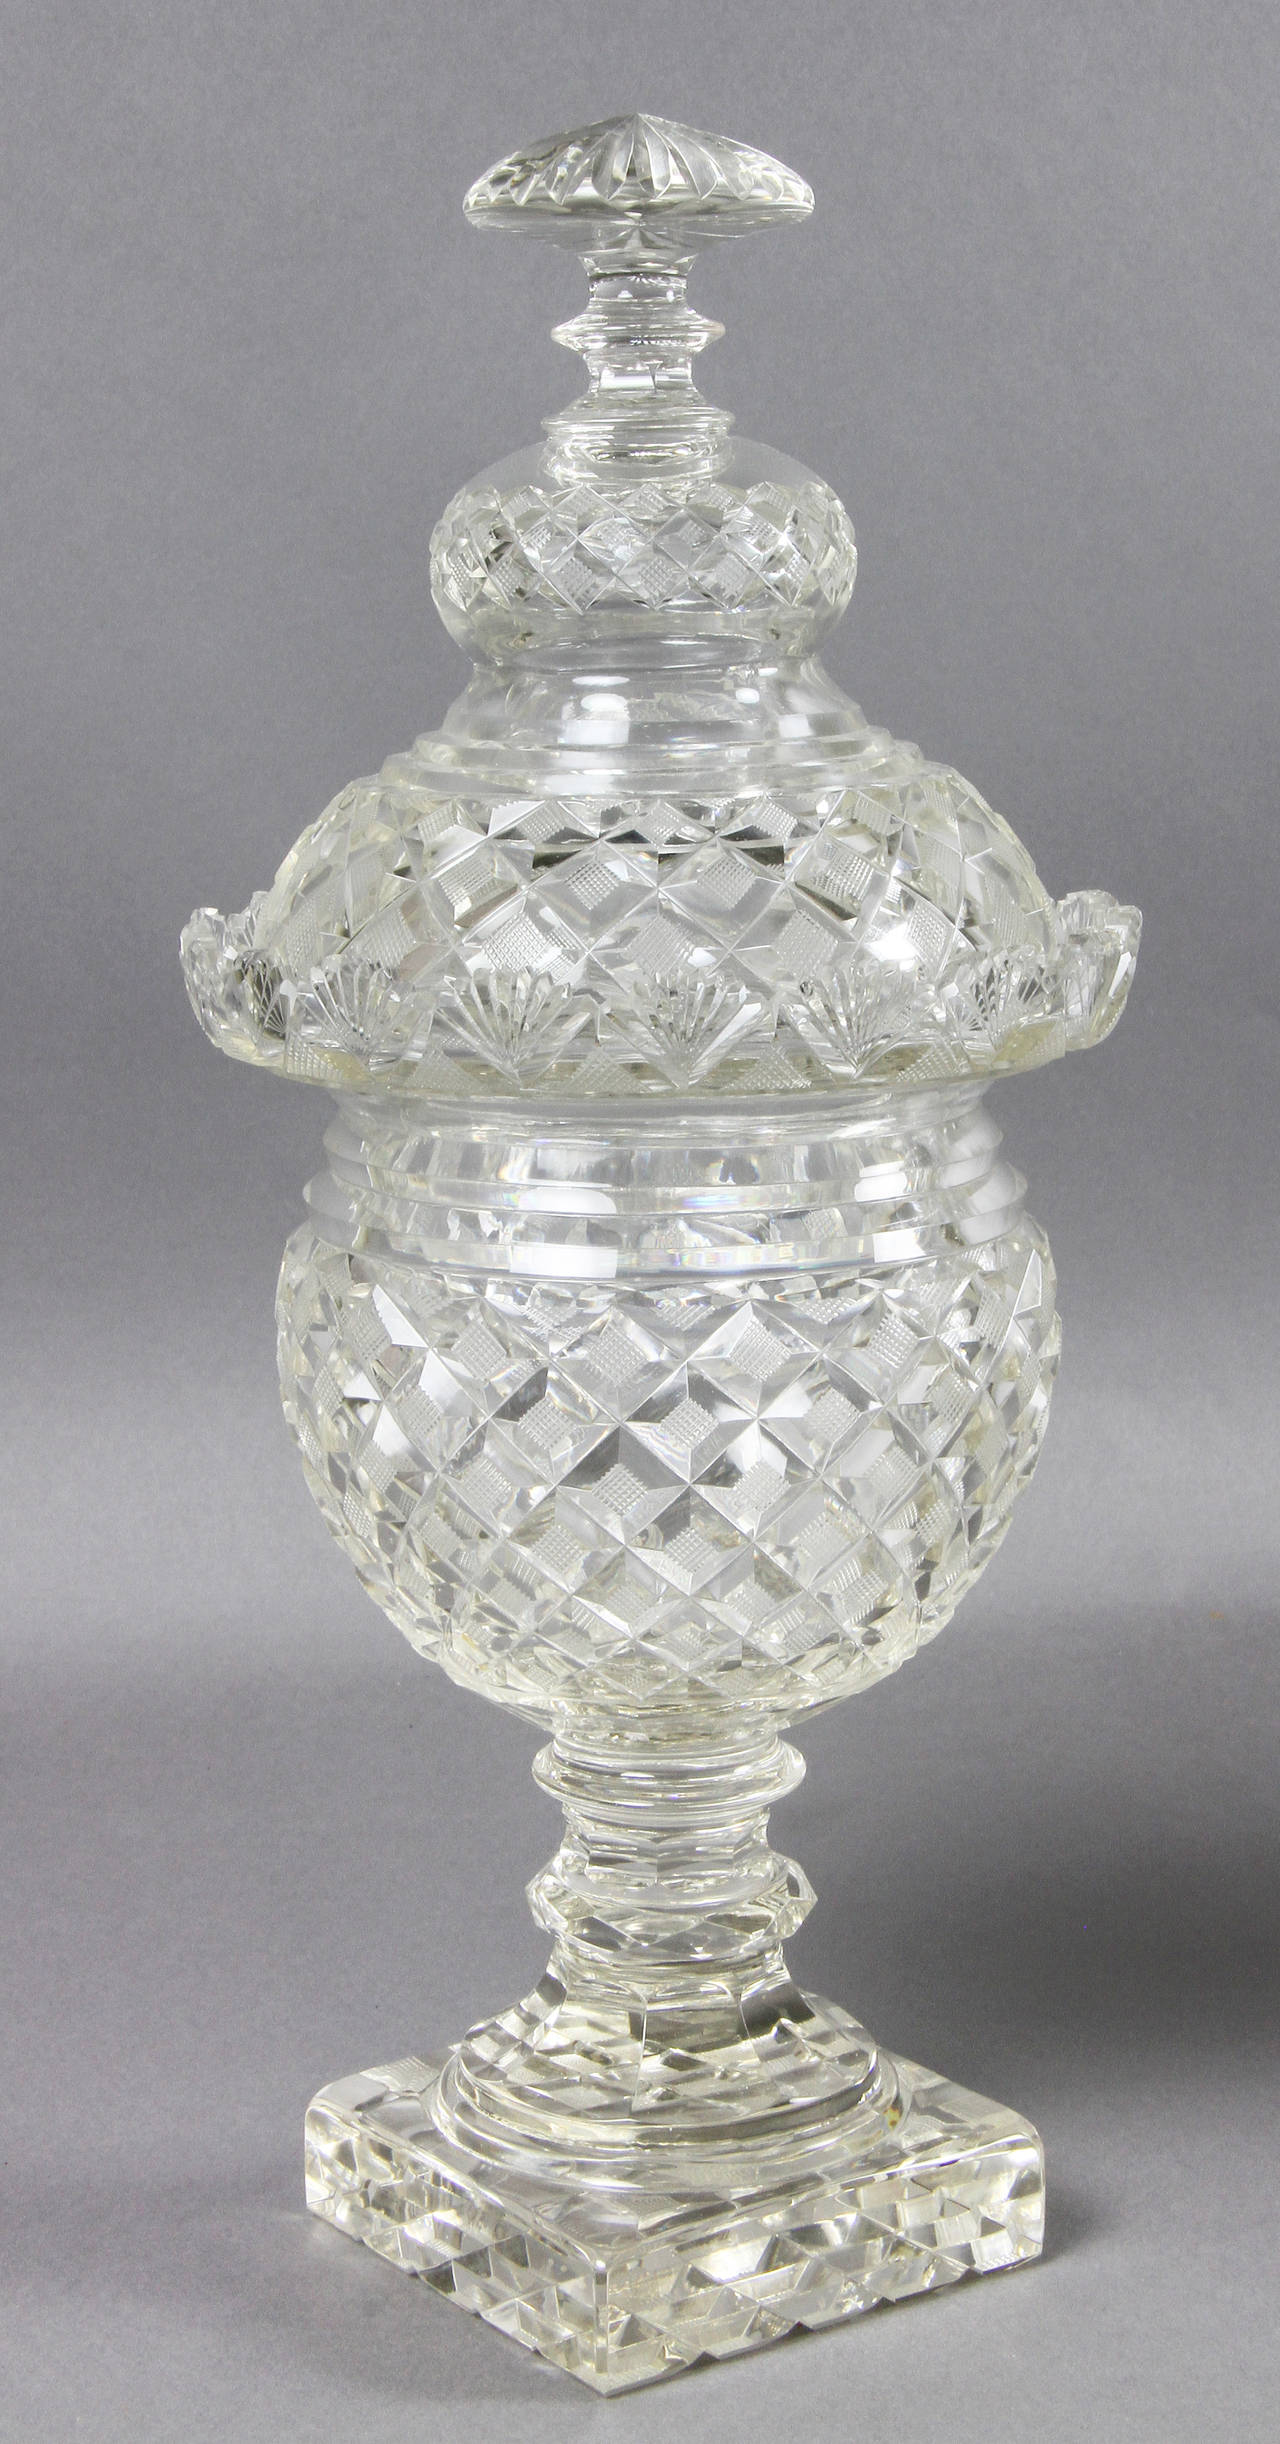 Each with a domed cover with  finial over a diamond cut bowl with a square foot.